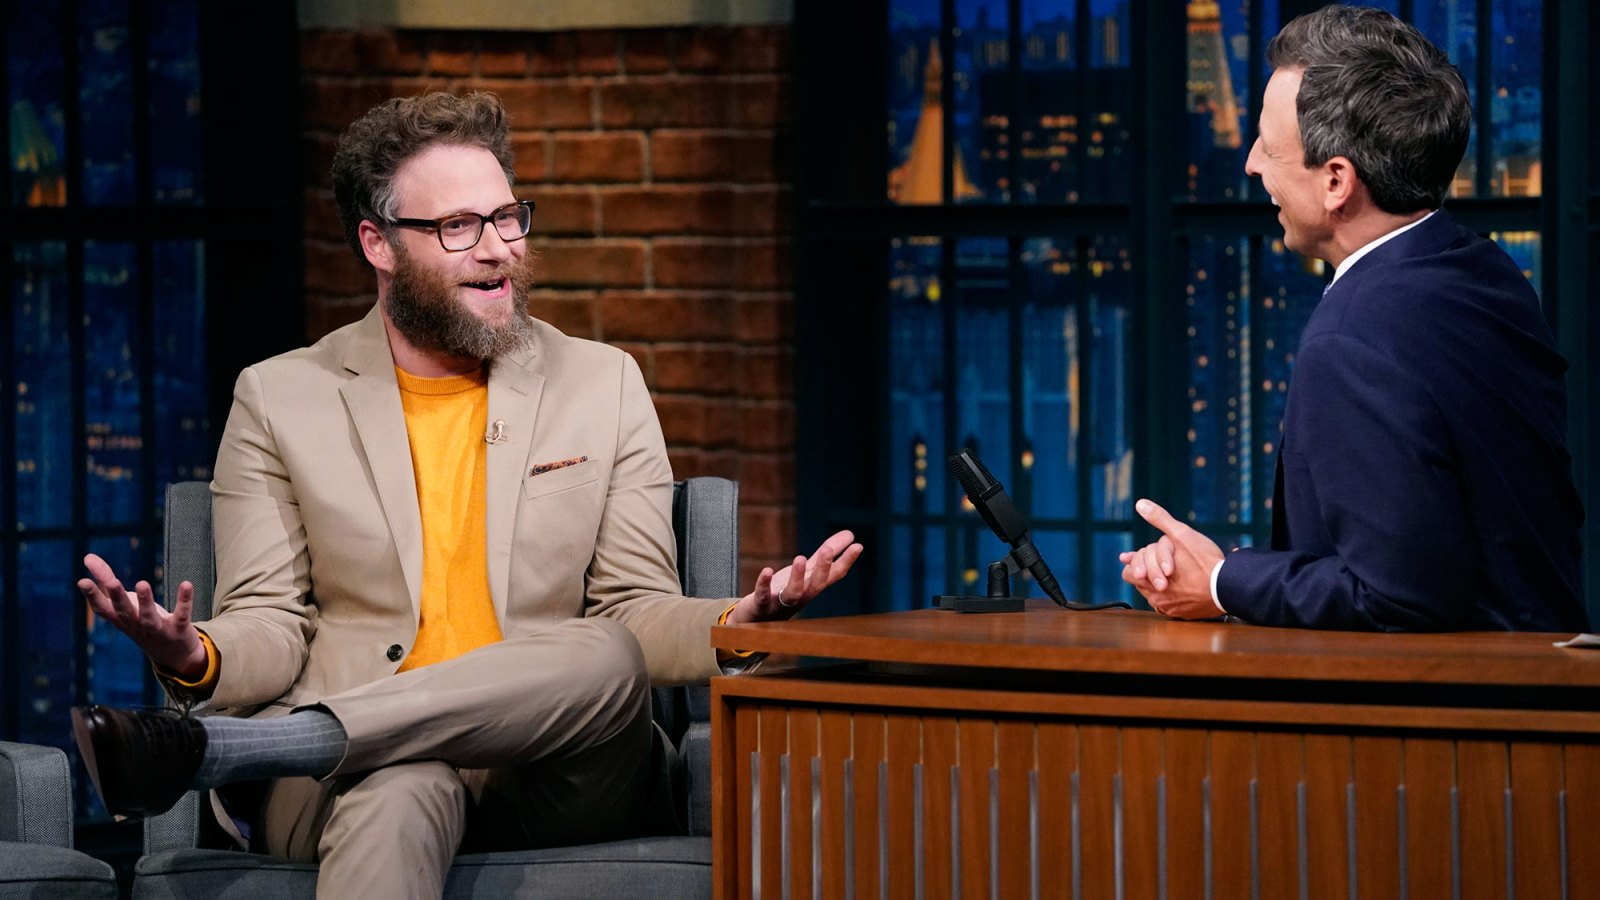 Seth Rogen during an interview with host Seth Meyers on August 8, 2018.